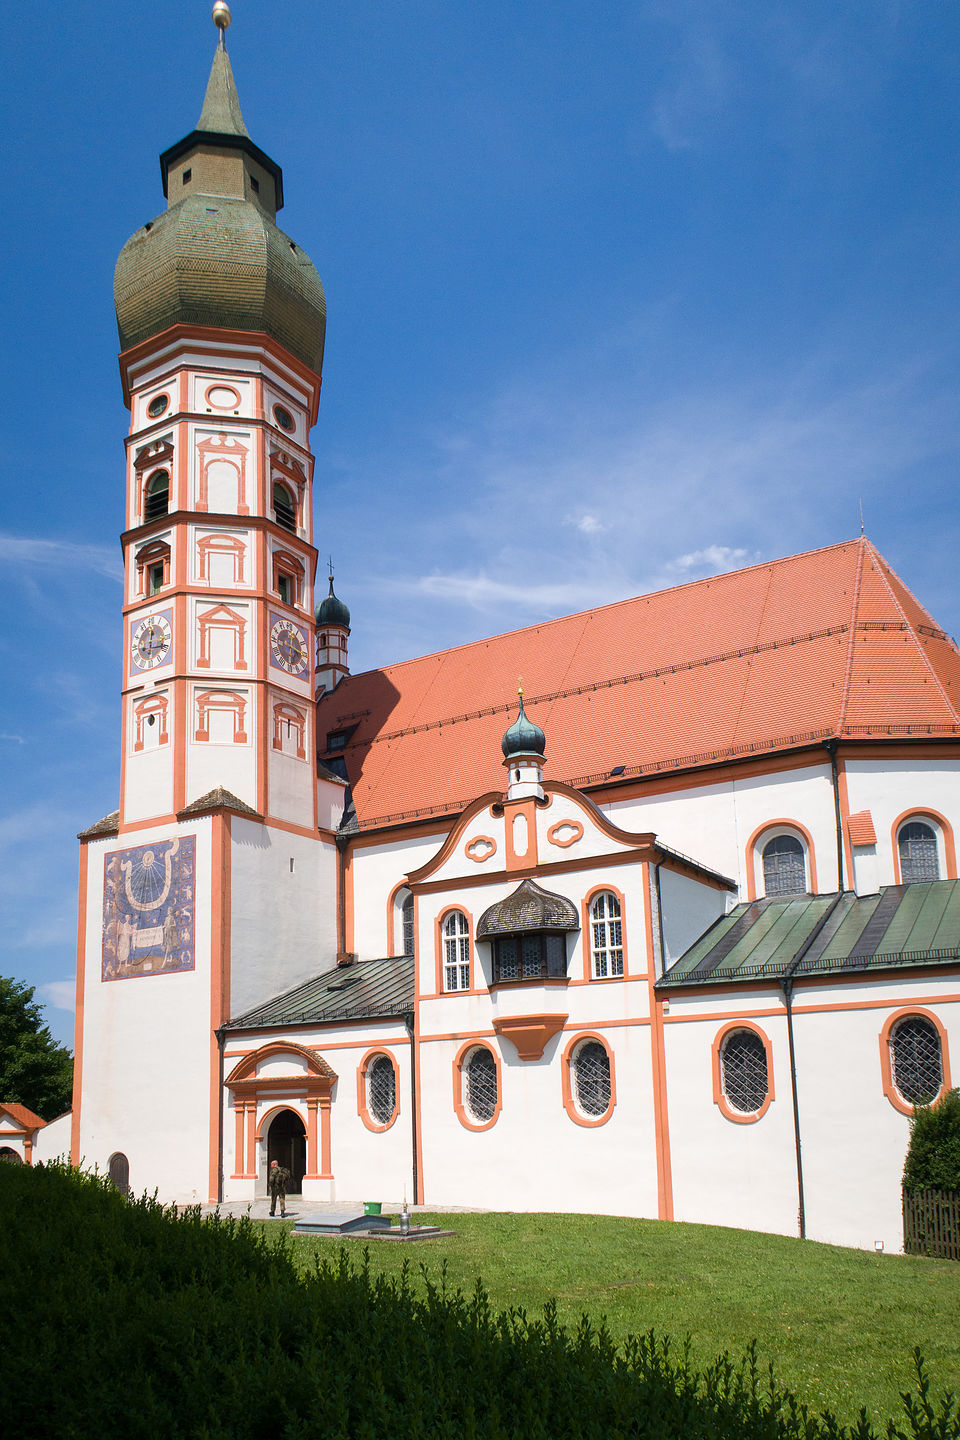 andechs-monastery-pilgrimage-church-lolo-s-extreme-cross-country-rv-trips